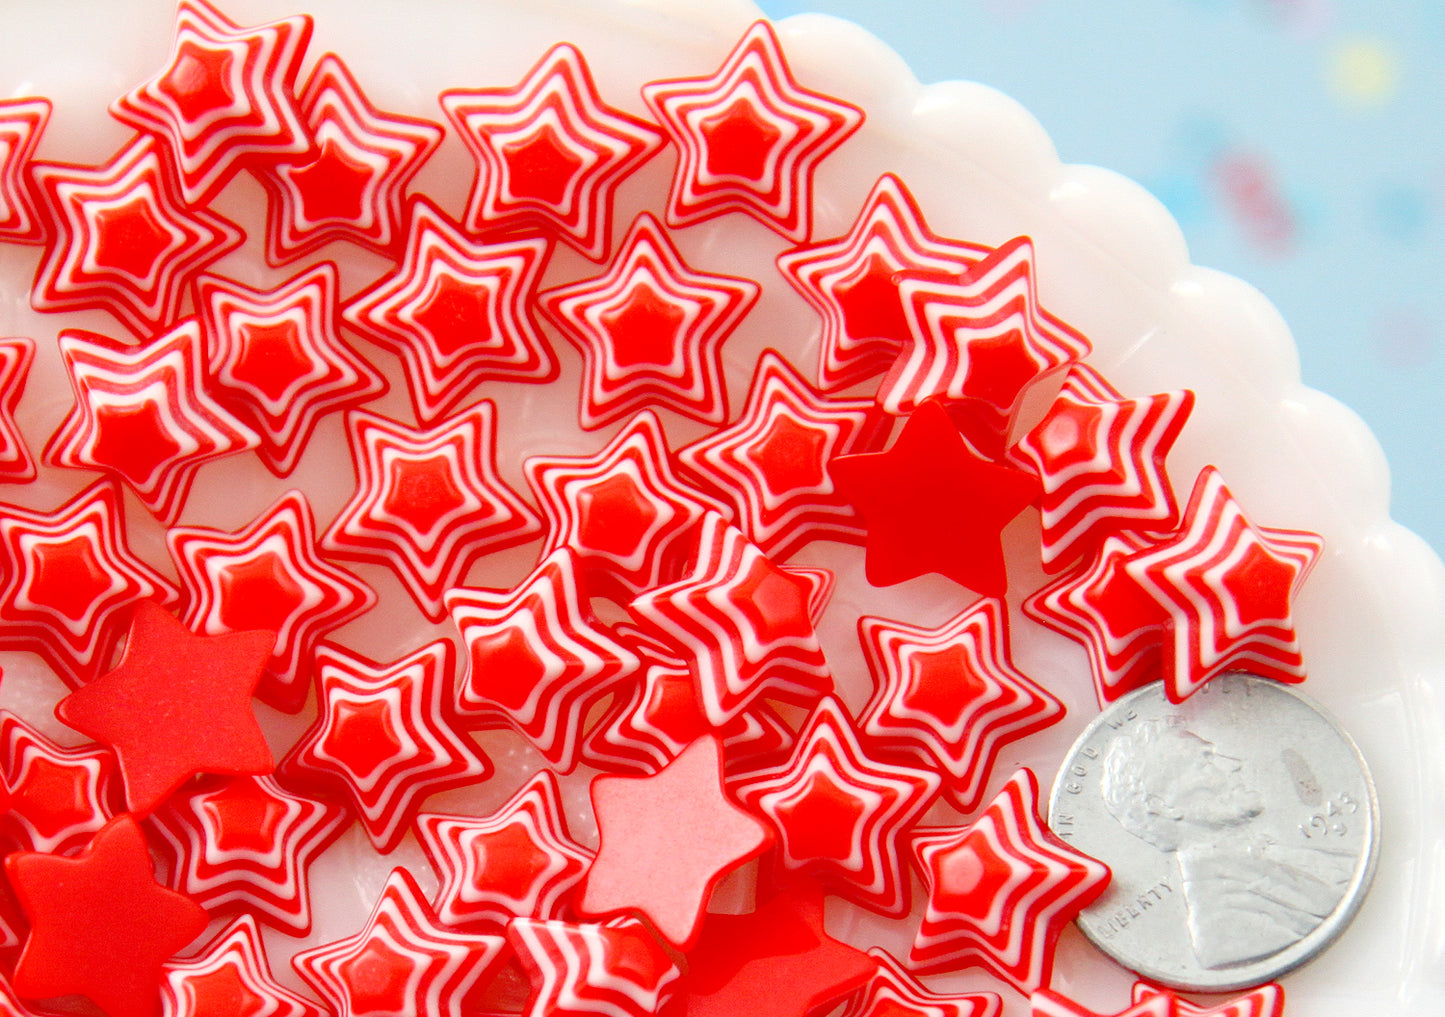 Striped Resin Stars - 13mm Bright Red Striped Resin Star Cabochons - 15 pc set